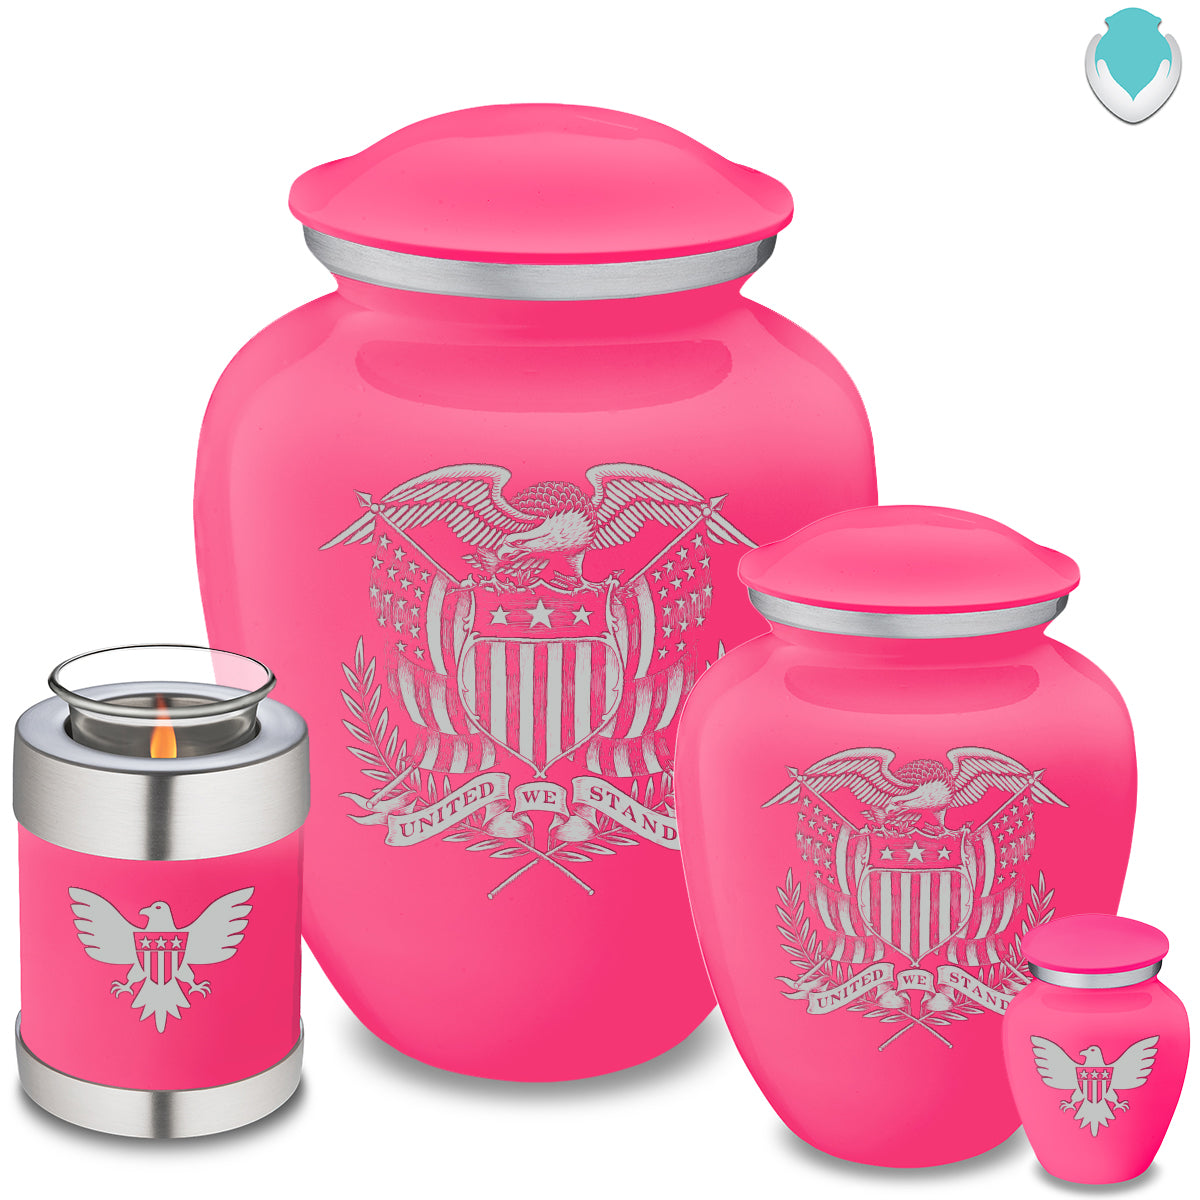 Candle Holder Embrace Bright Pink American Glory Cremation Urn